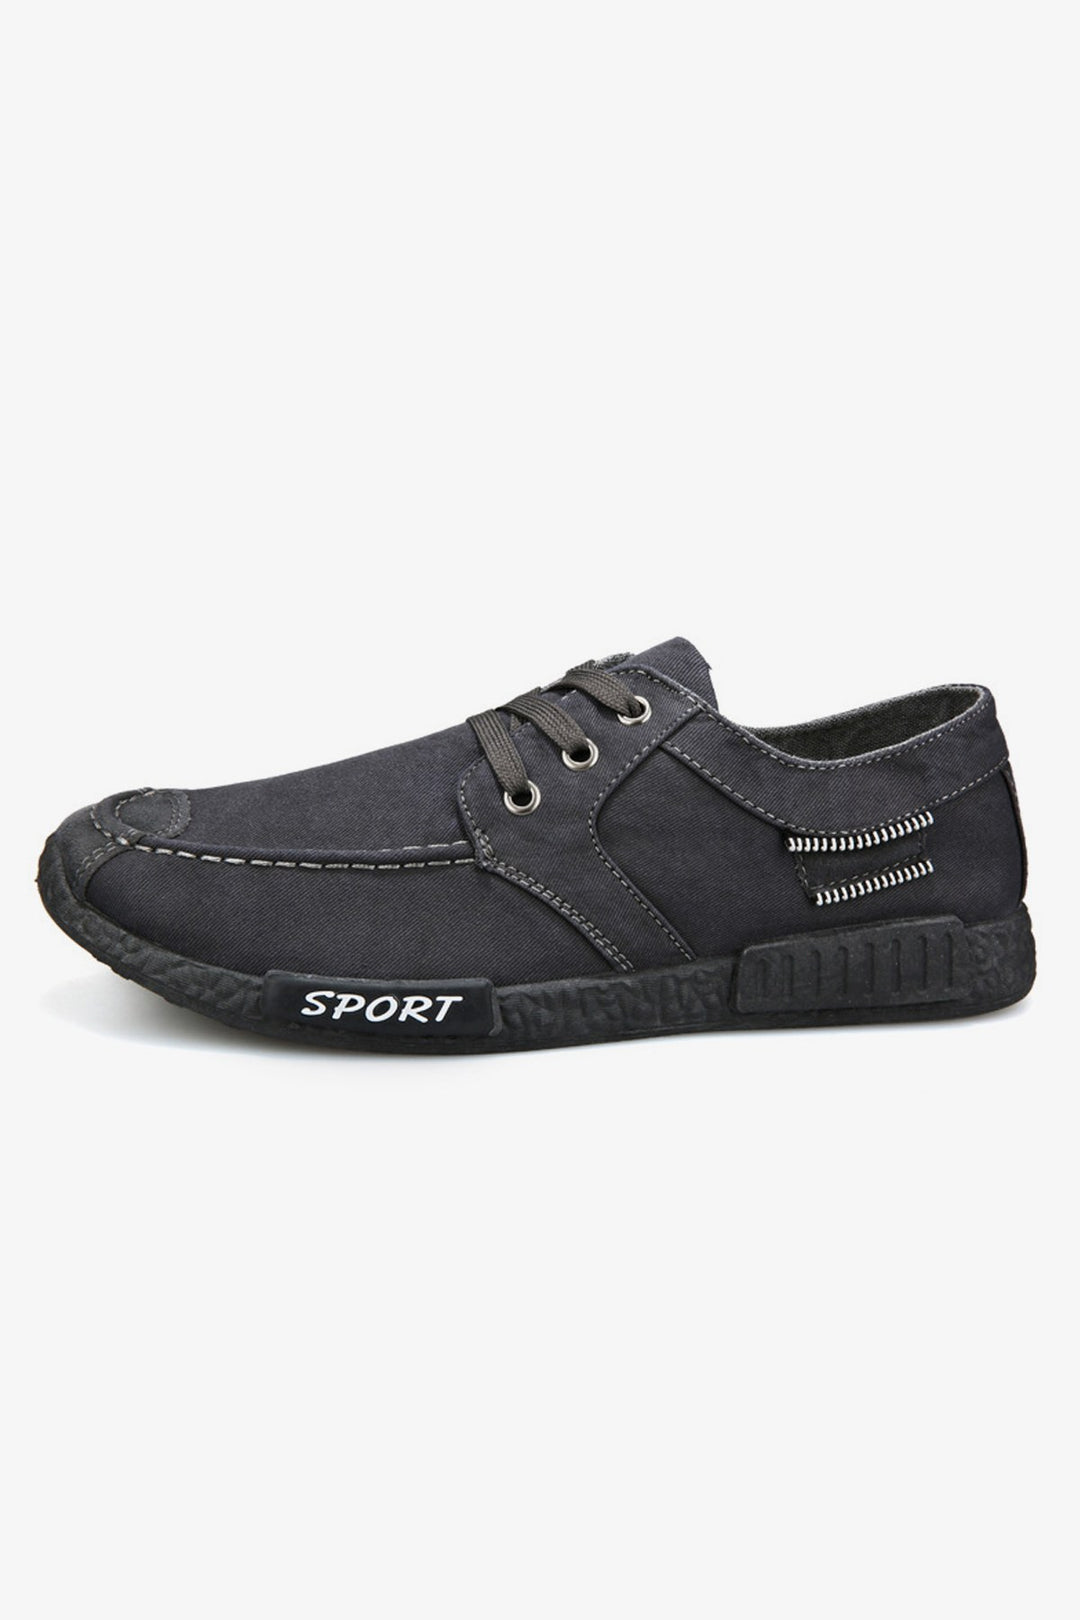 Grey Sporty Casual Shoes - S22 - WFW0011